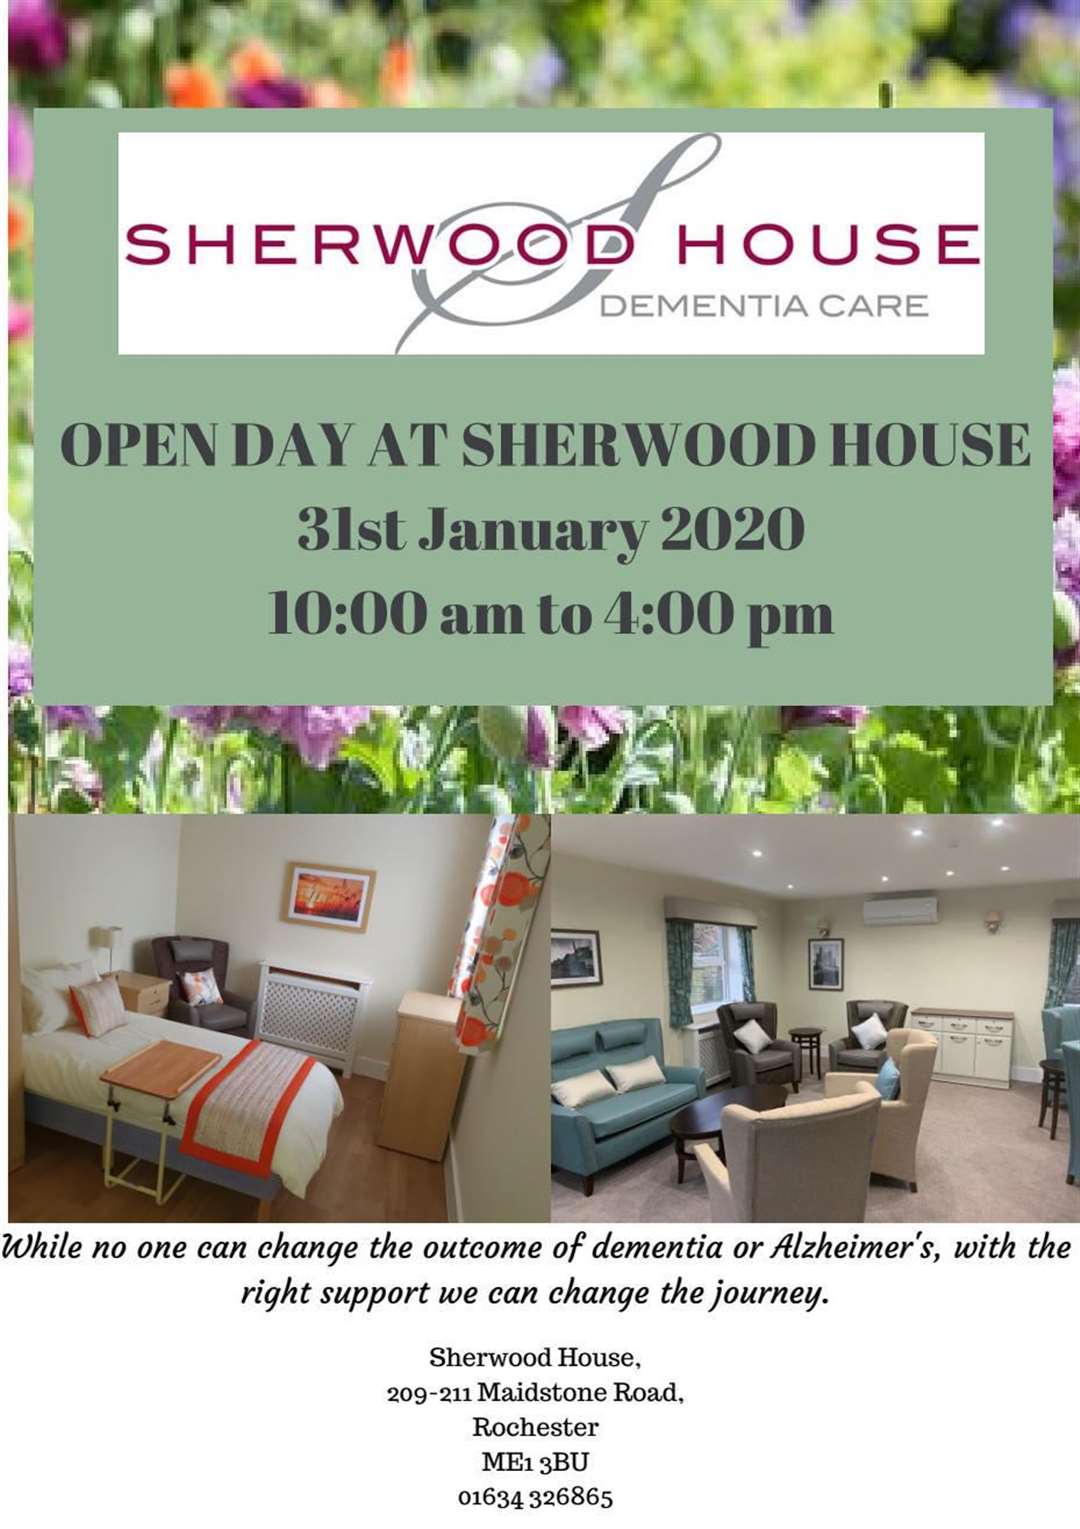 Do you or a loved one know someone who is suffering from dementia? Visit the Sherwood House Open Day.